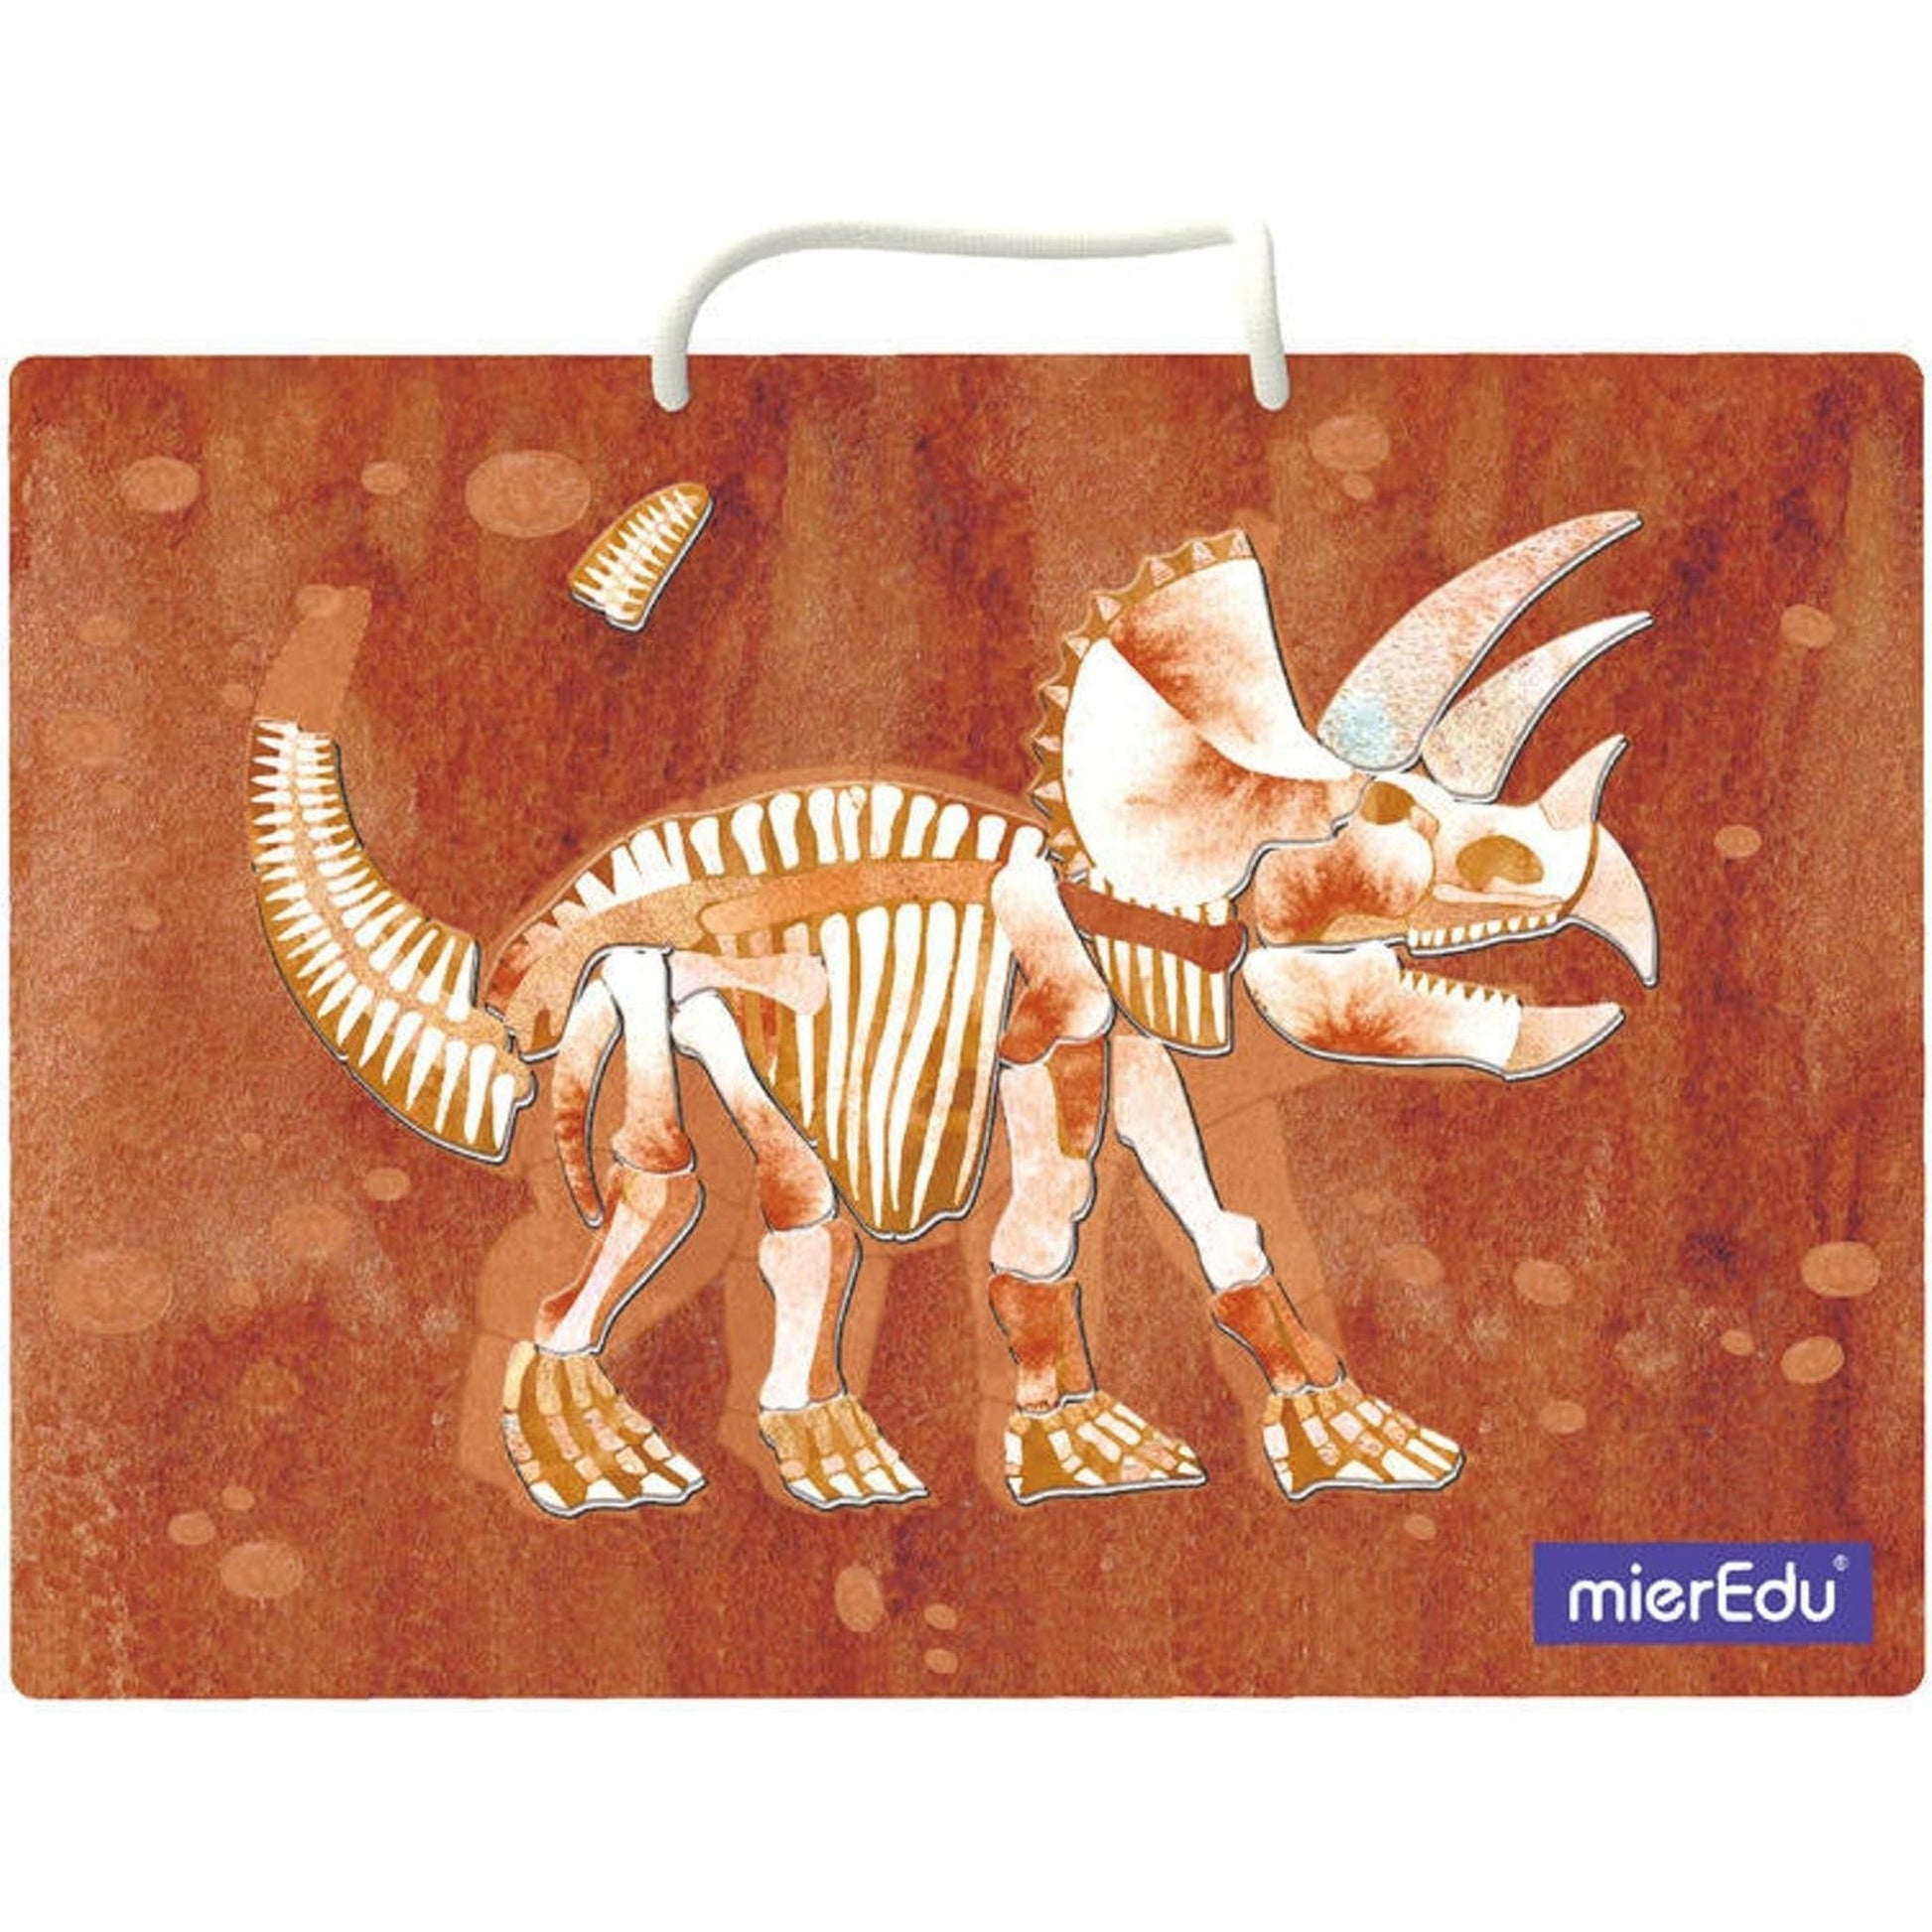 Magnetic Pad - Triceratops - Toybox Tales